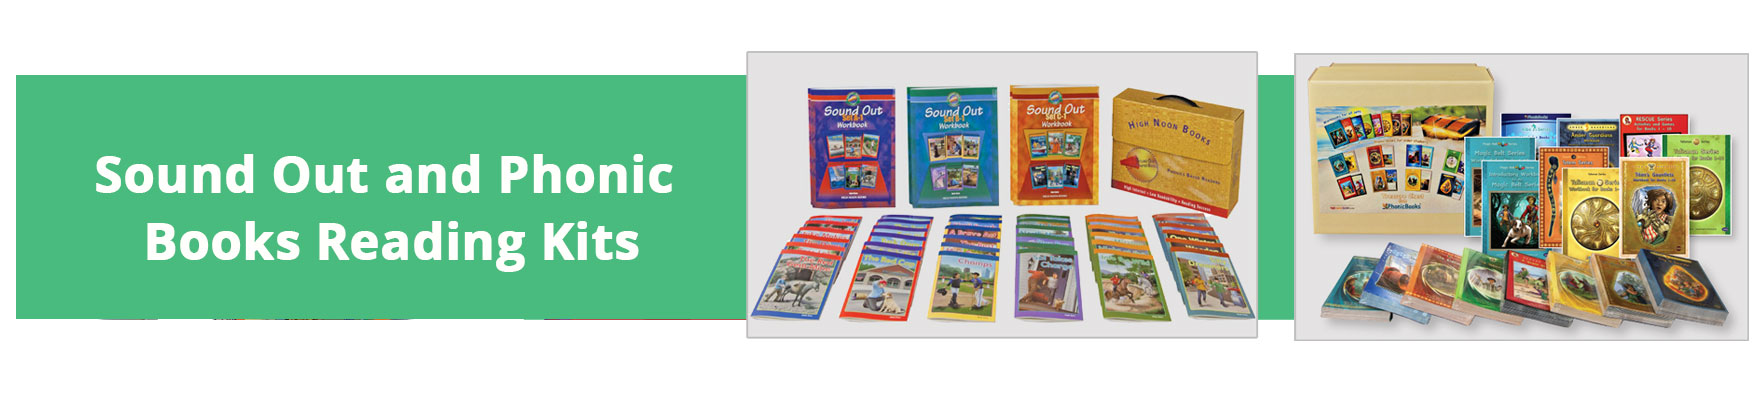 Reading Kits and Special Offers for Sound Out and Phonic Books